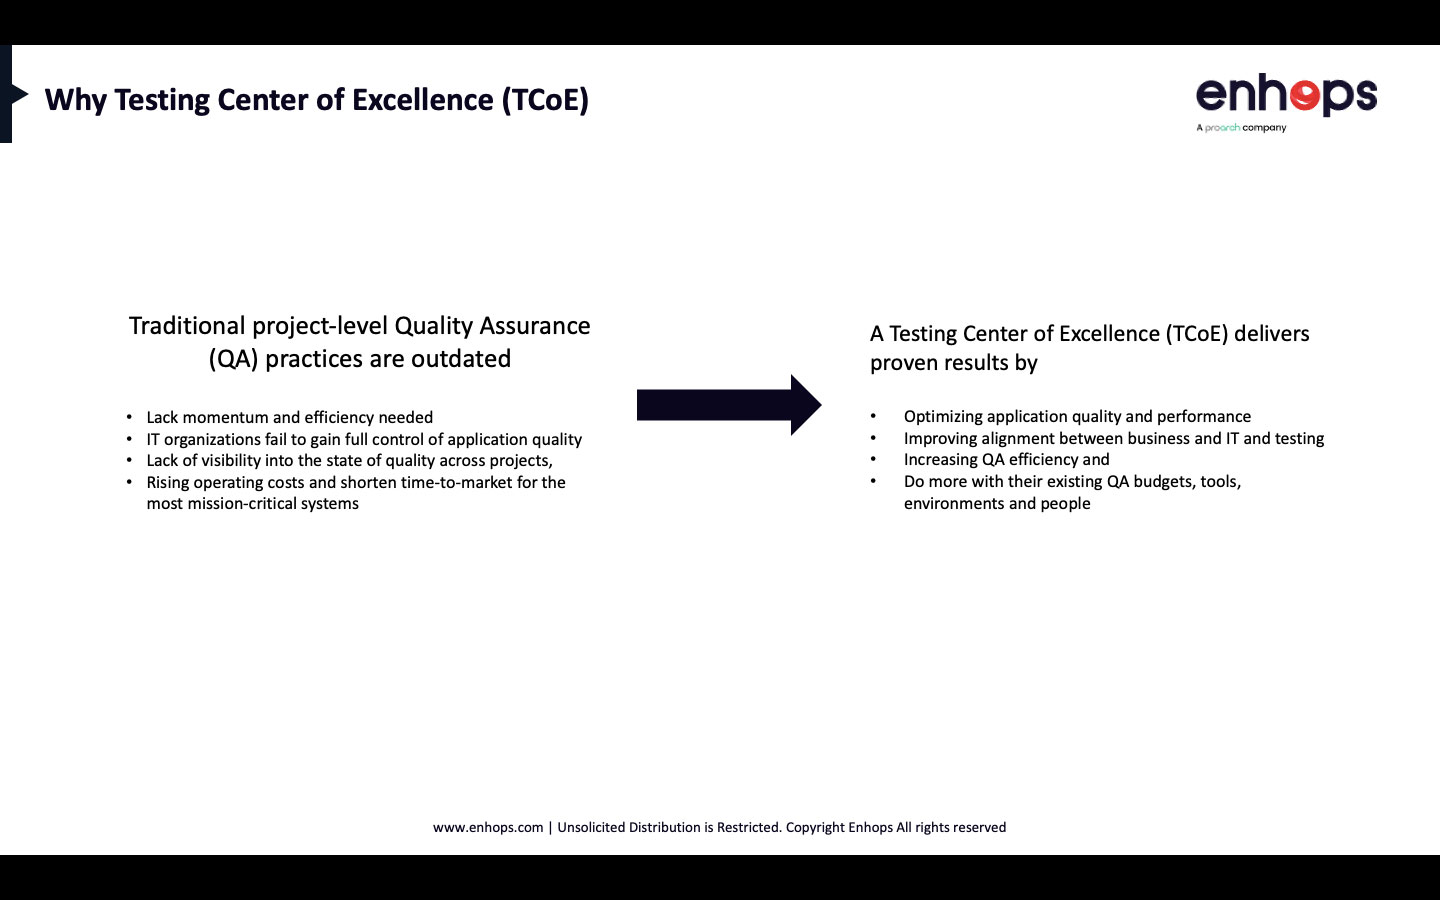 Why Testing Center of Excellence?